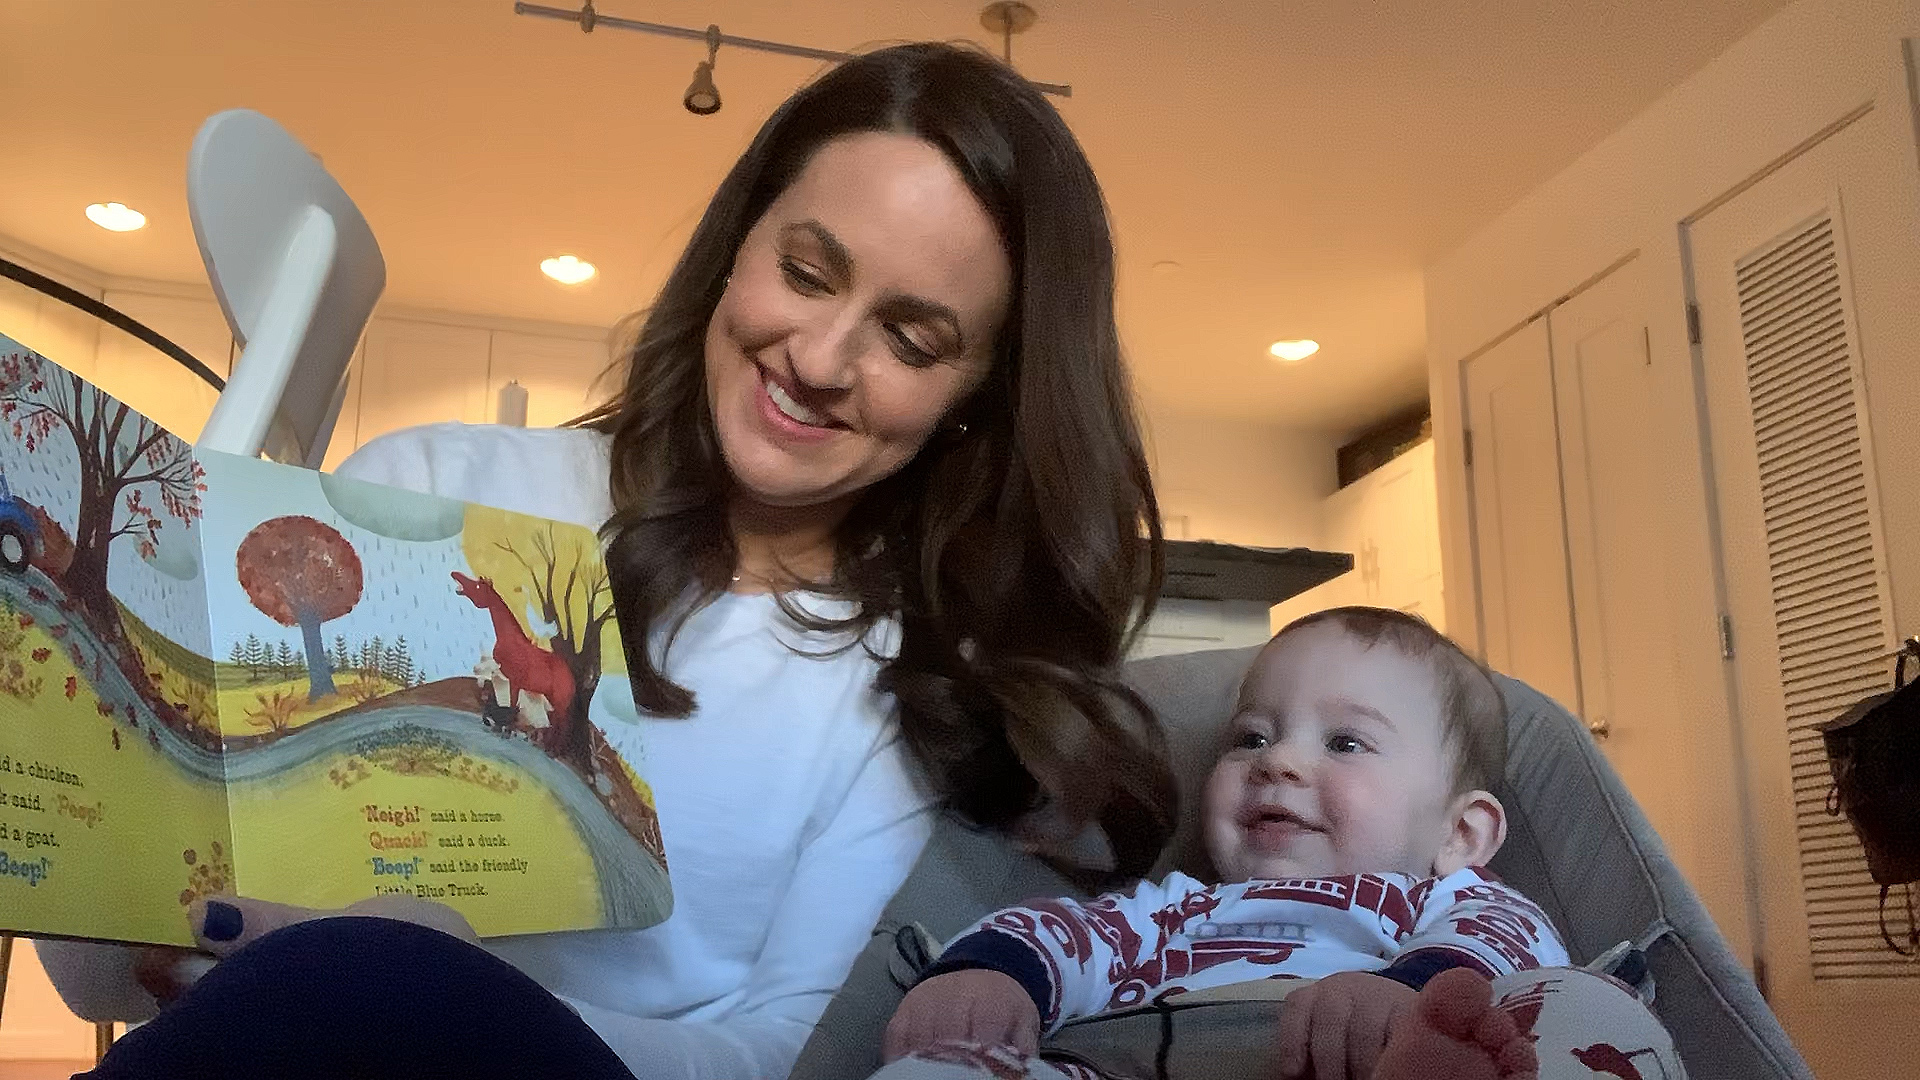 With everyone having to be cooped up at home, it's even more important than ever to stay connected. So let's read a book with Lindsey Mills and her baby boy, Roux!